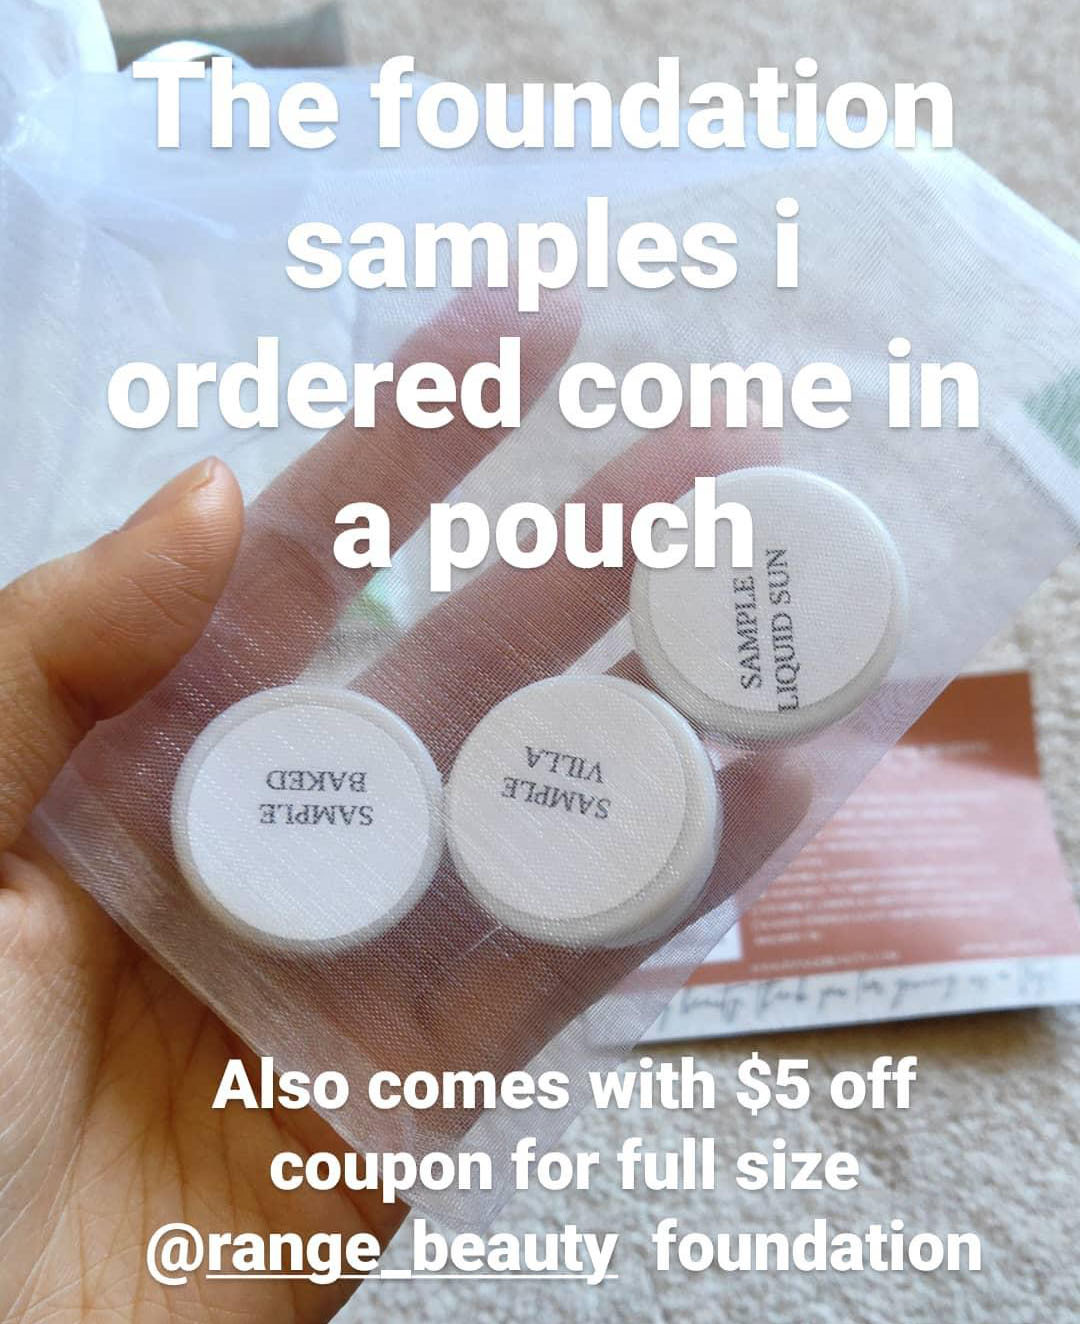 Picture from my Instagram story of the Range Beauty foundation samples in an organza pouch that they come in